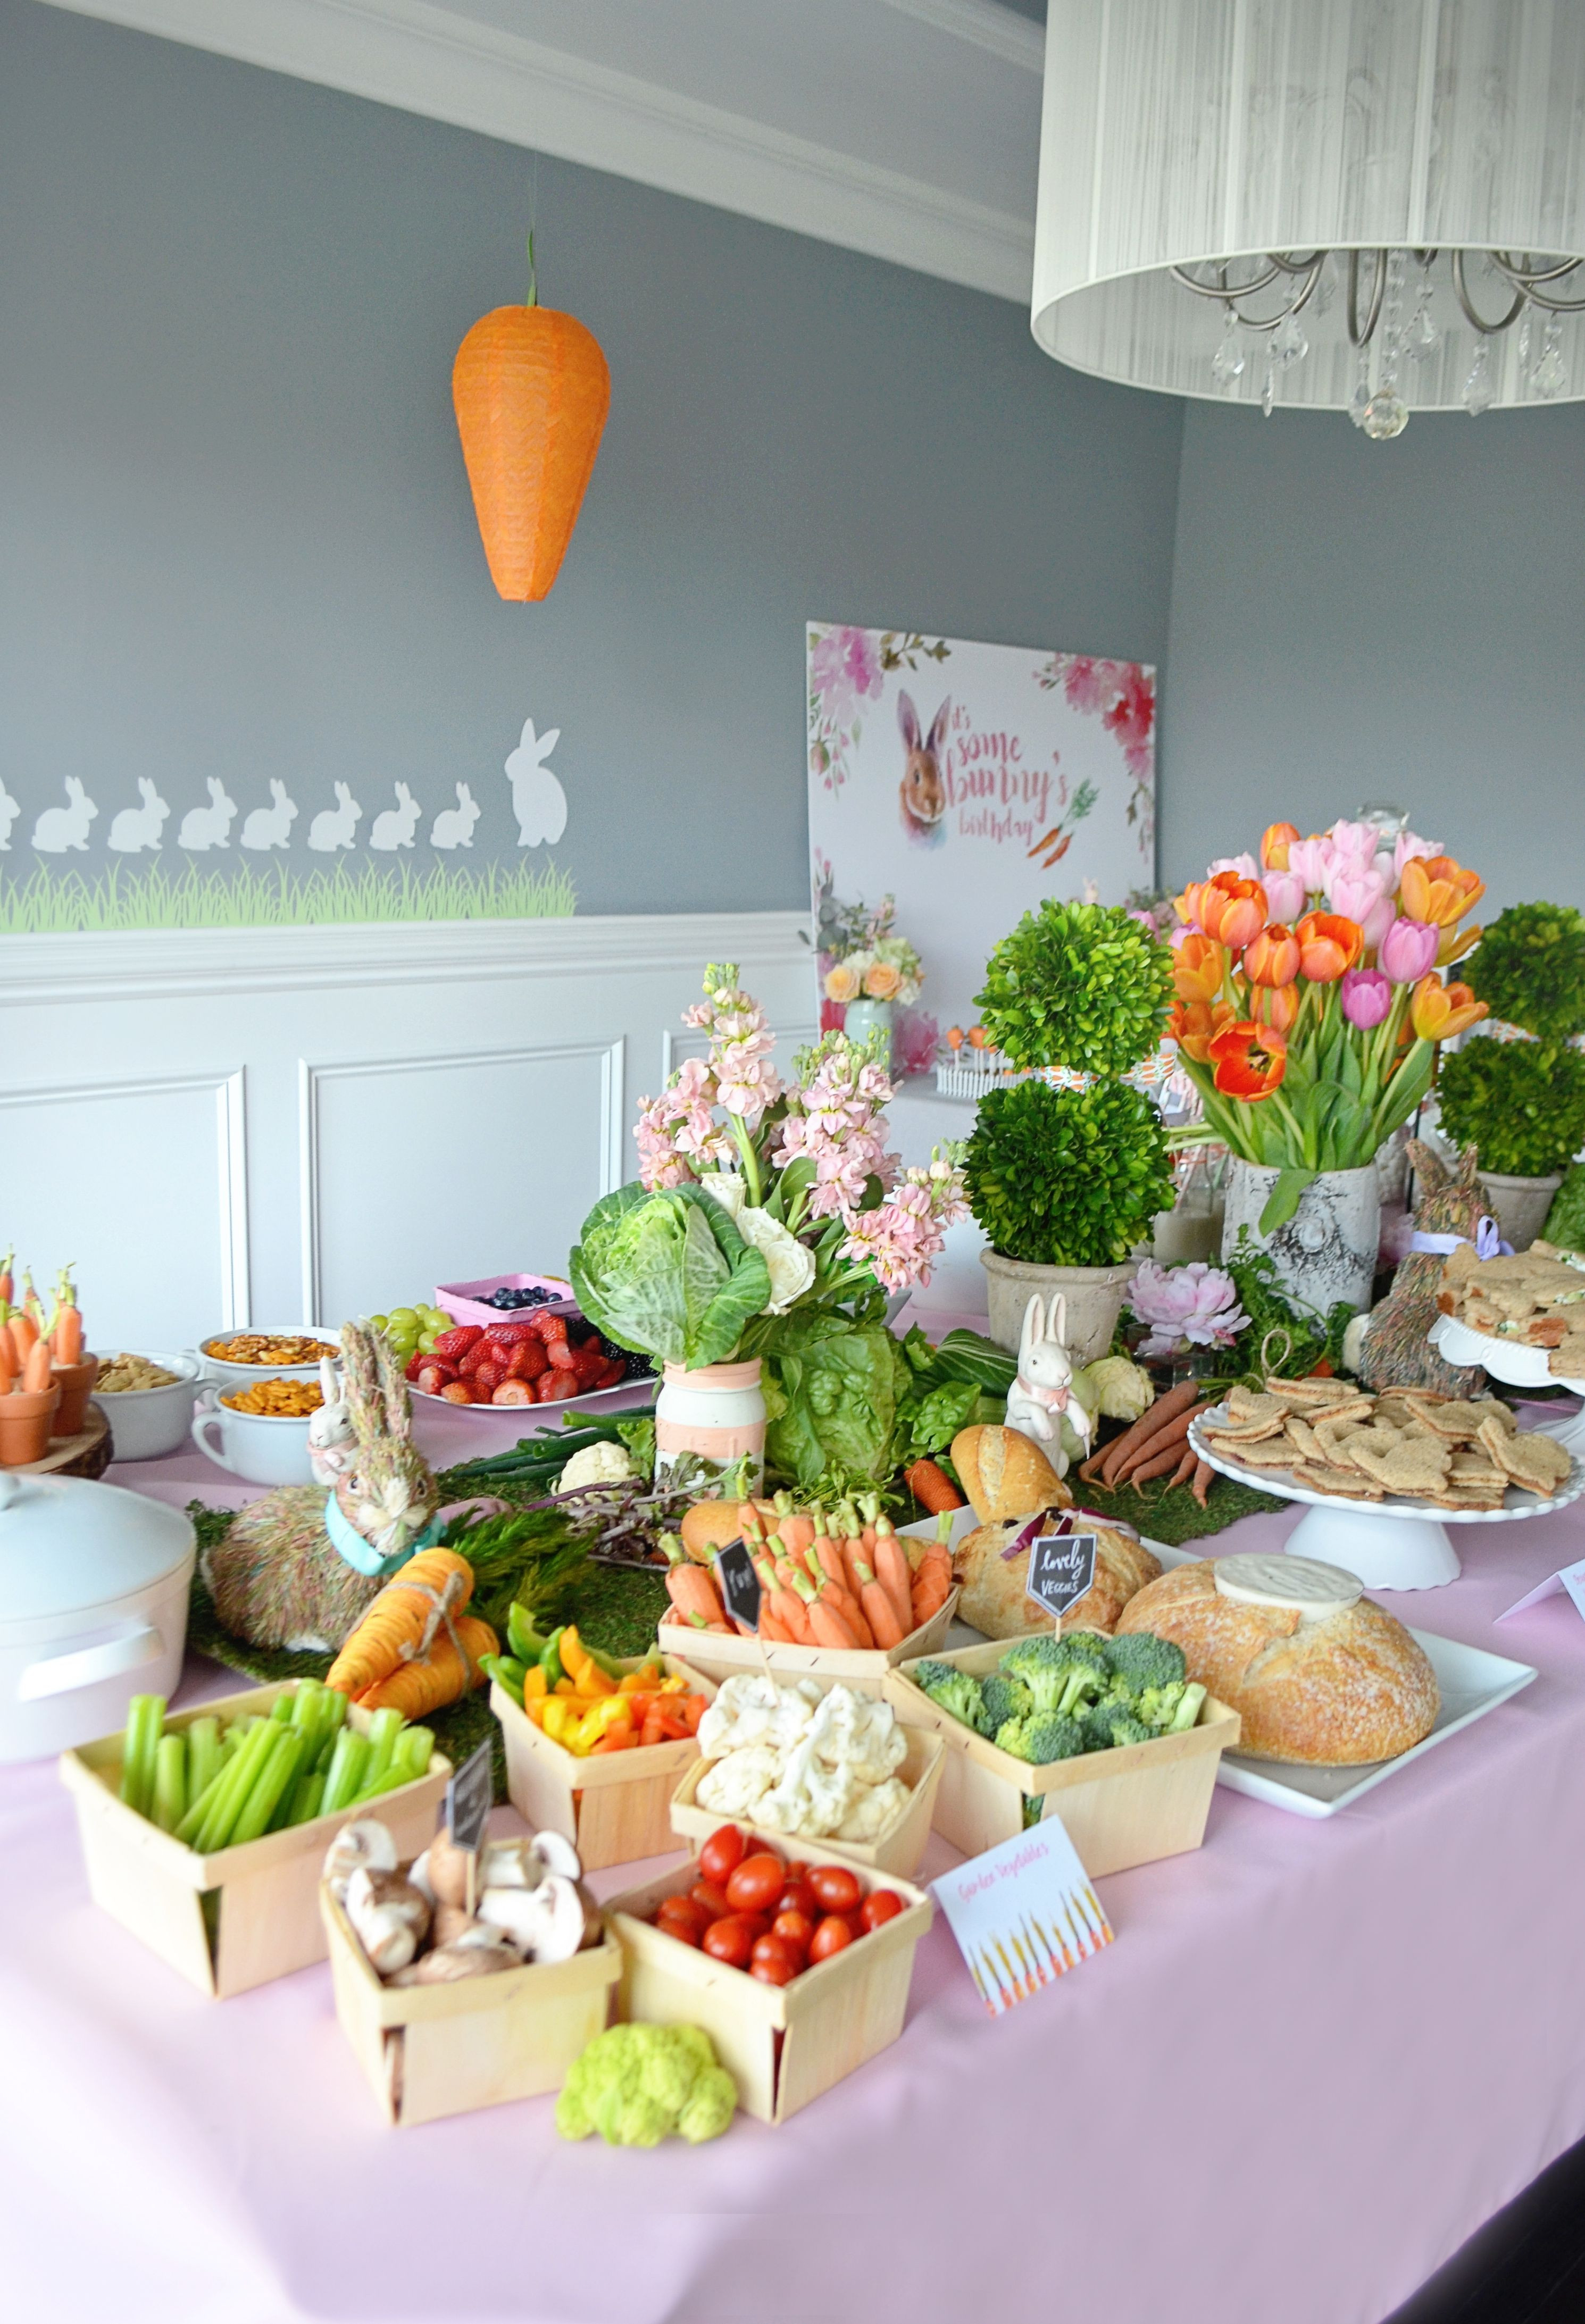 Easter Themed Birthday Party Ideas
 Shop the Party Bunny Themed Party Easter